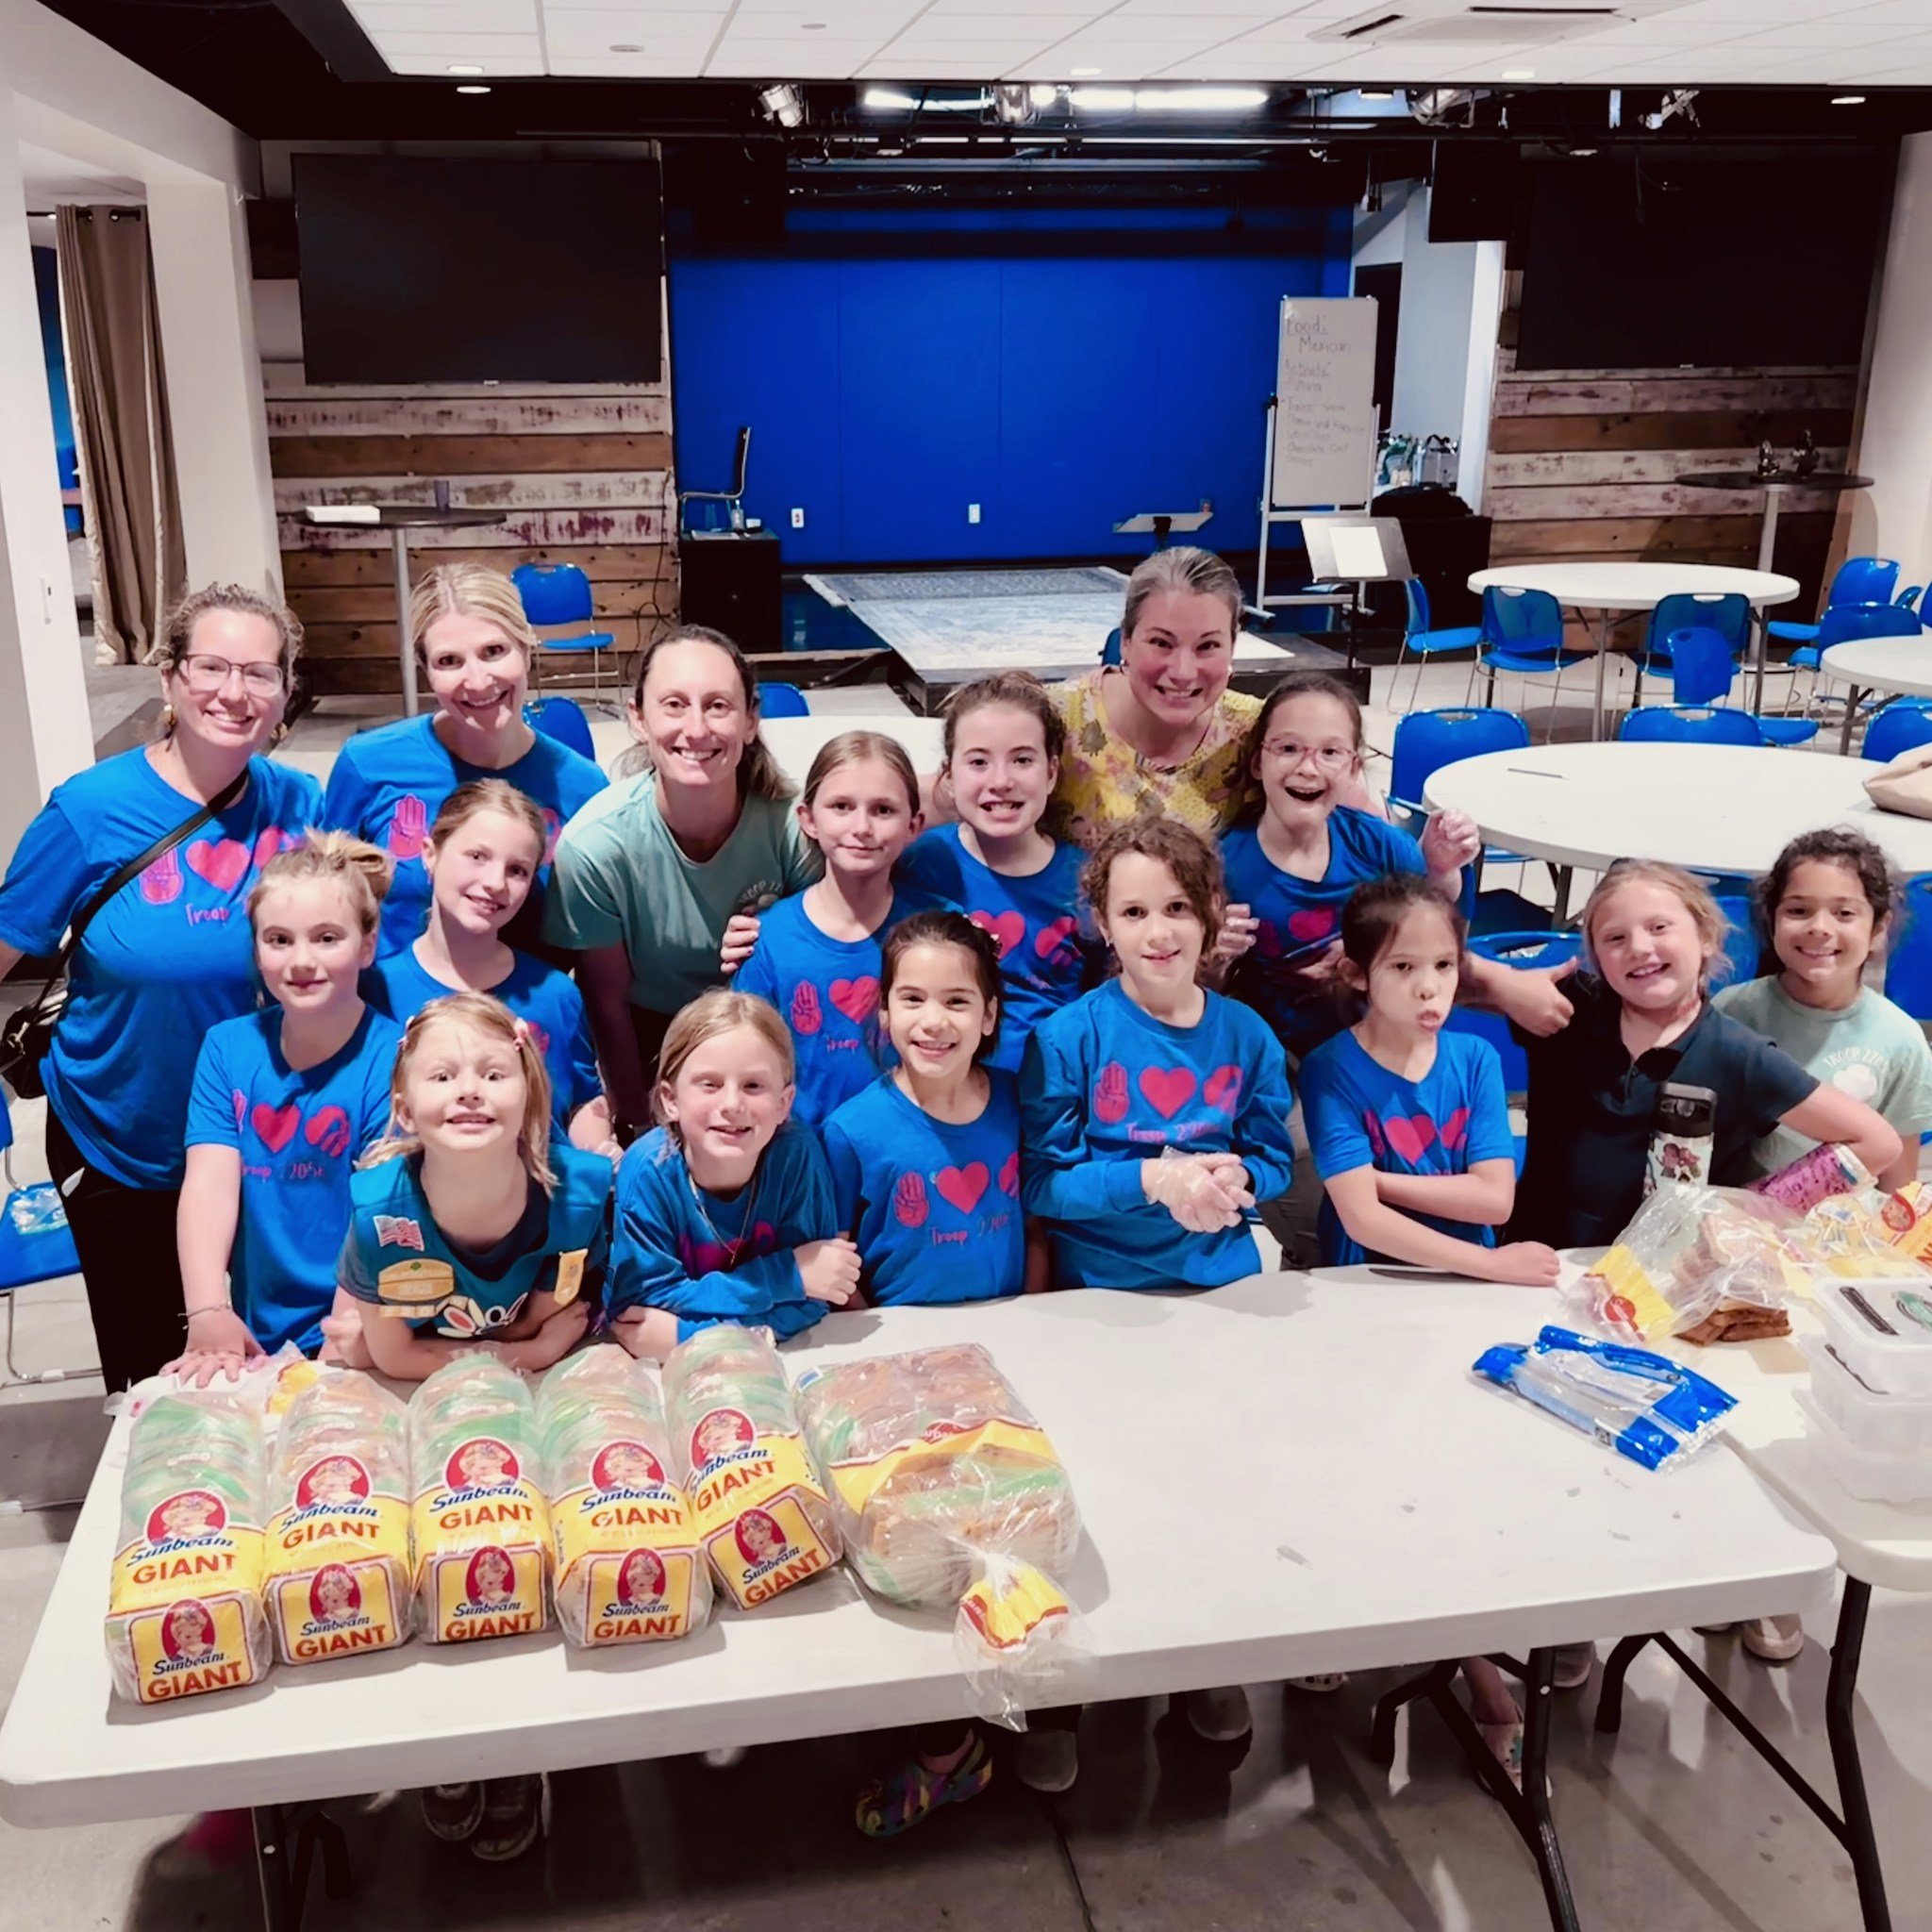 Girl Scout Troop 22056 had a great time making sandwiches, and we are thankful to them for supporting TSP! ☮️ 💚 🥪 #girlscoutsdoinggood #feedthehungry